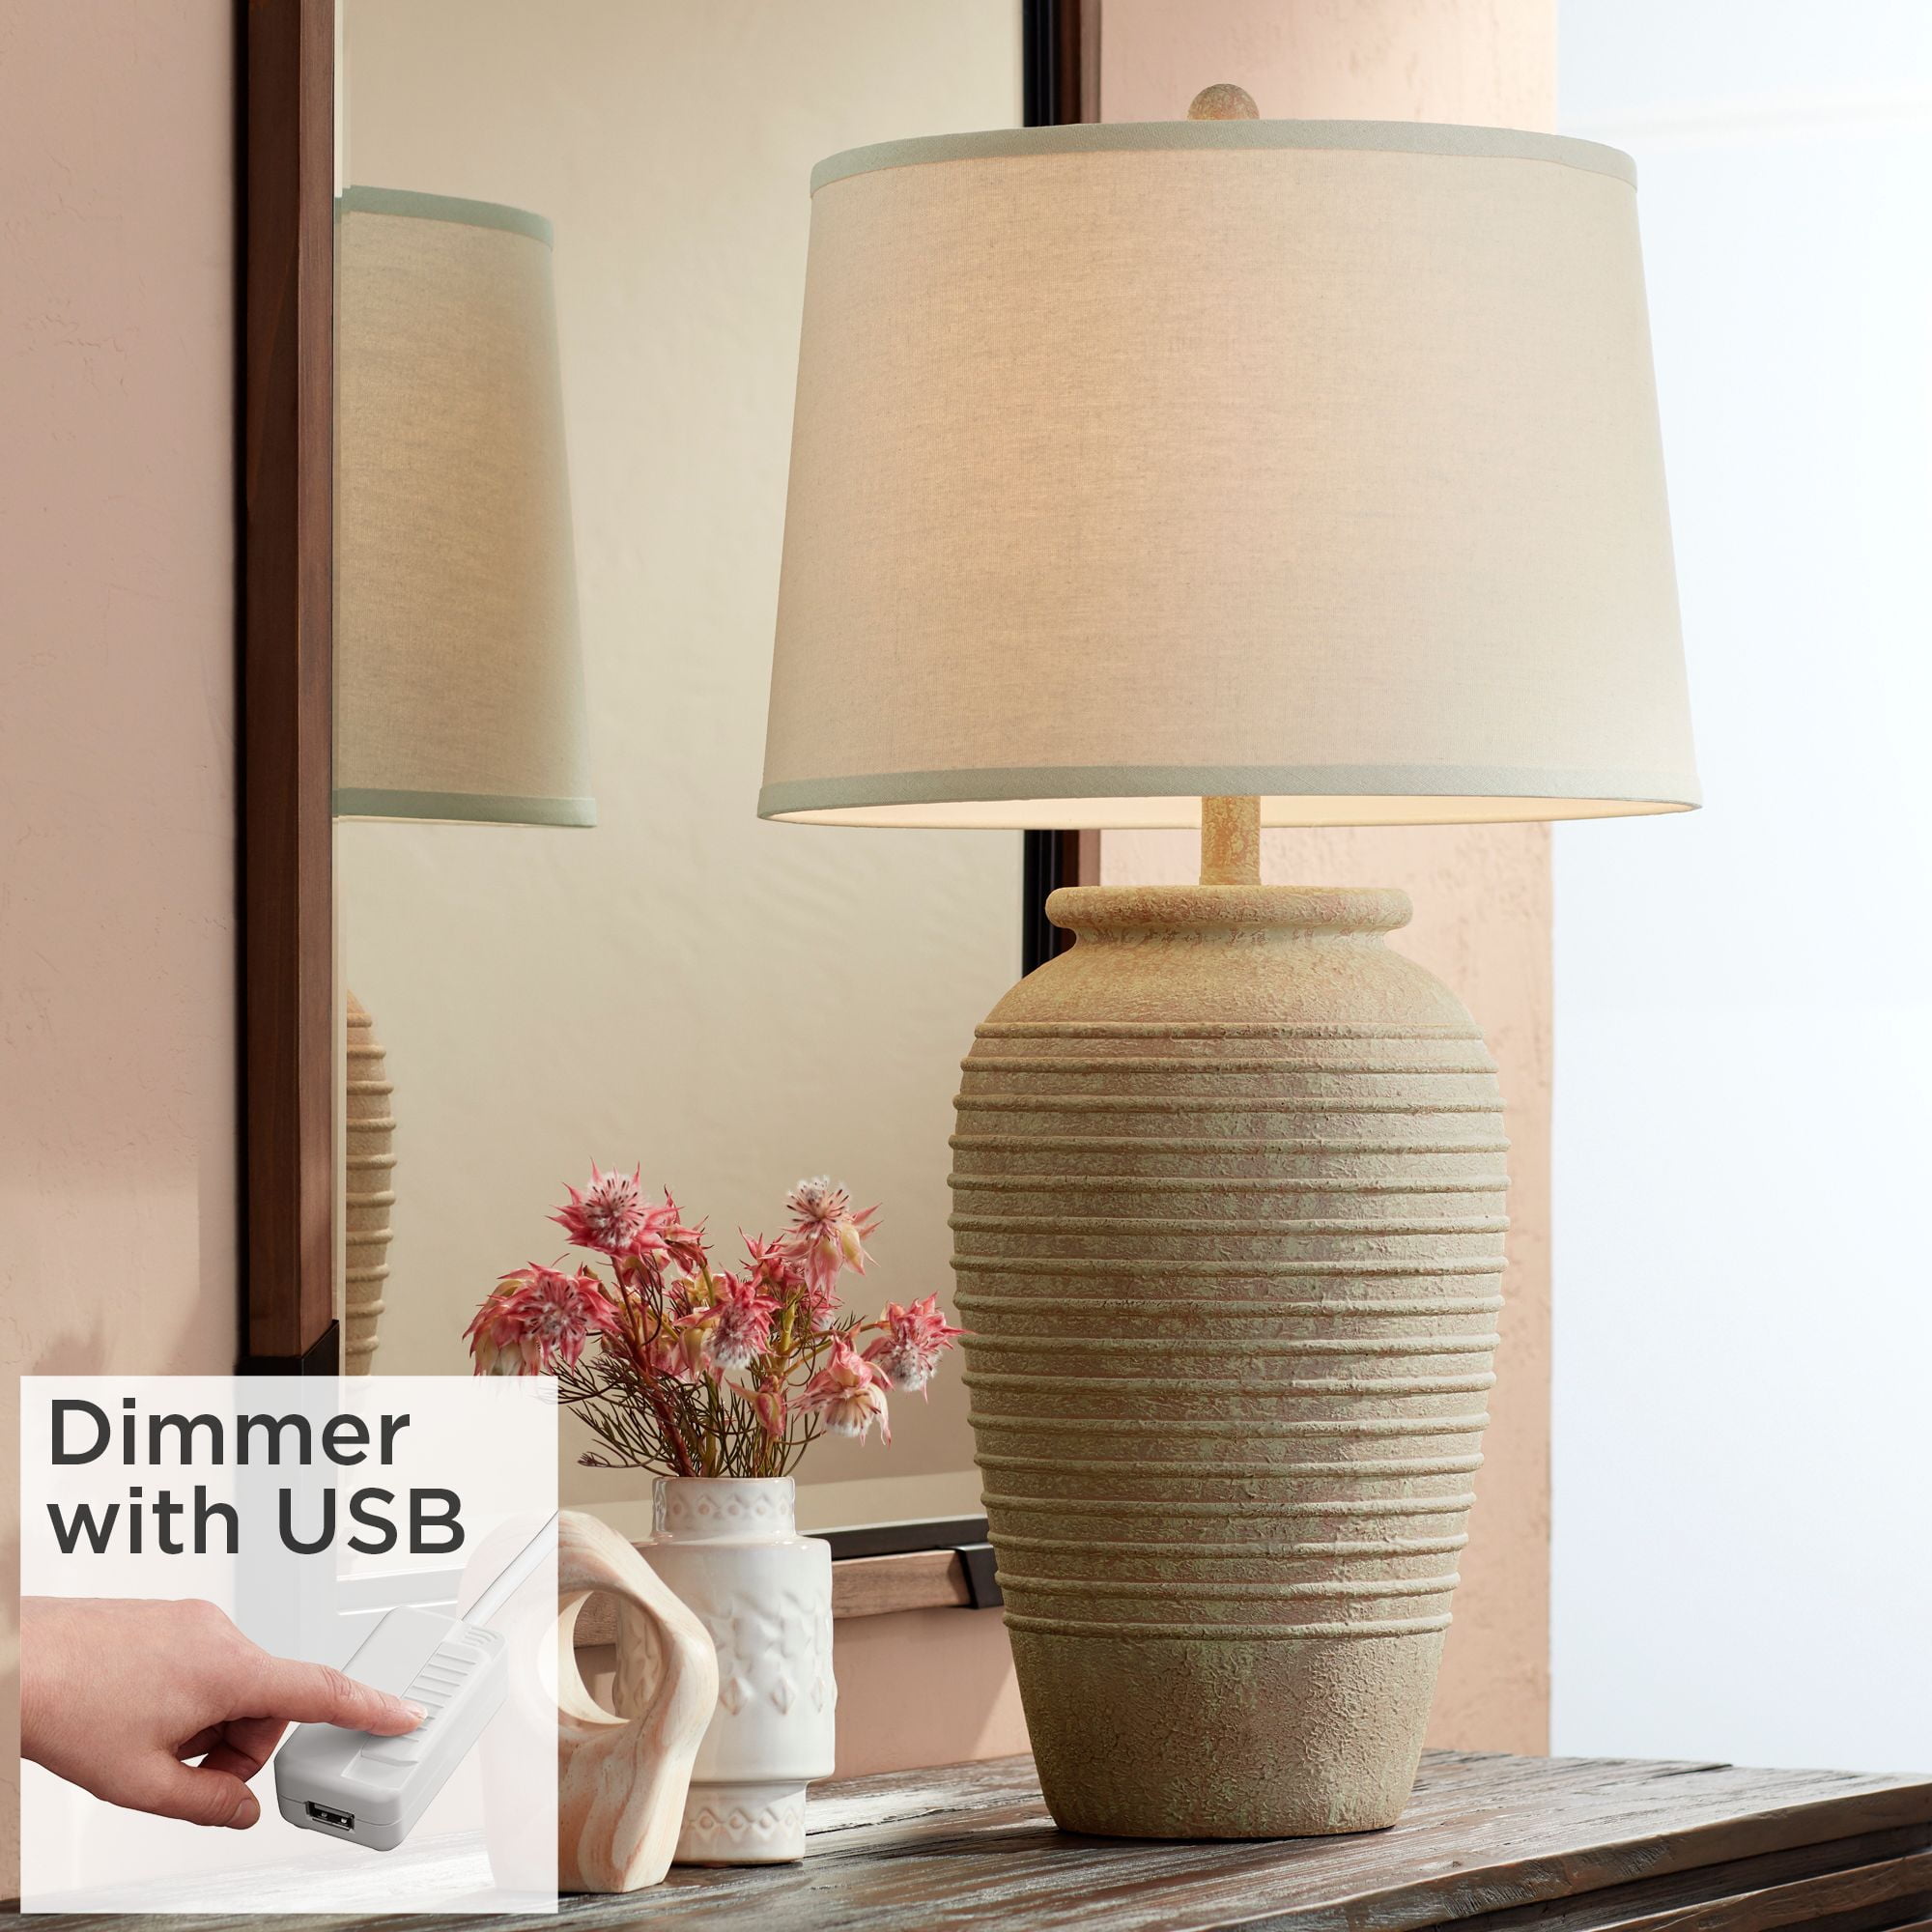 Monografie volume residentie John Timberland Country Cottage Table Lamp with USB Charging Port 28" Tall  Sand Cream Linen Drum Shade Living Room Bedroom House - Walmart.com